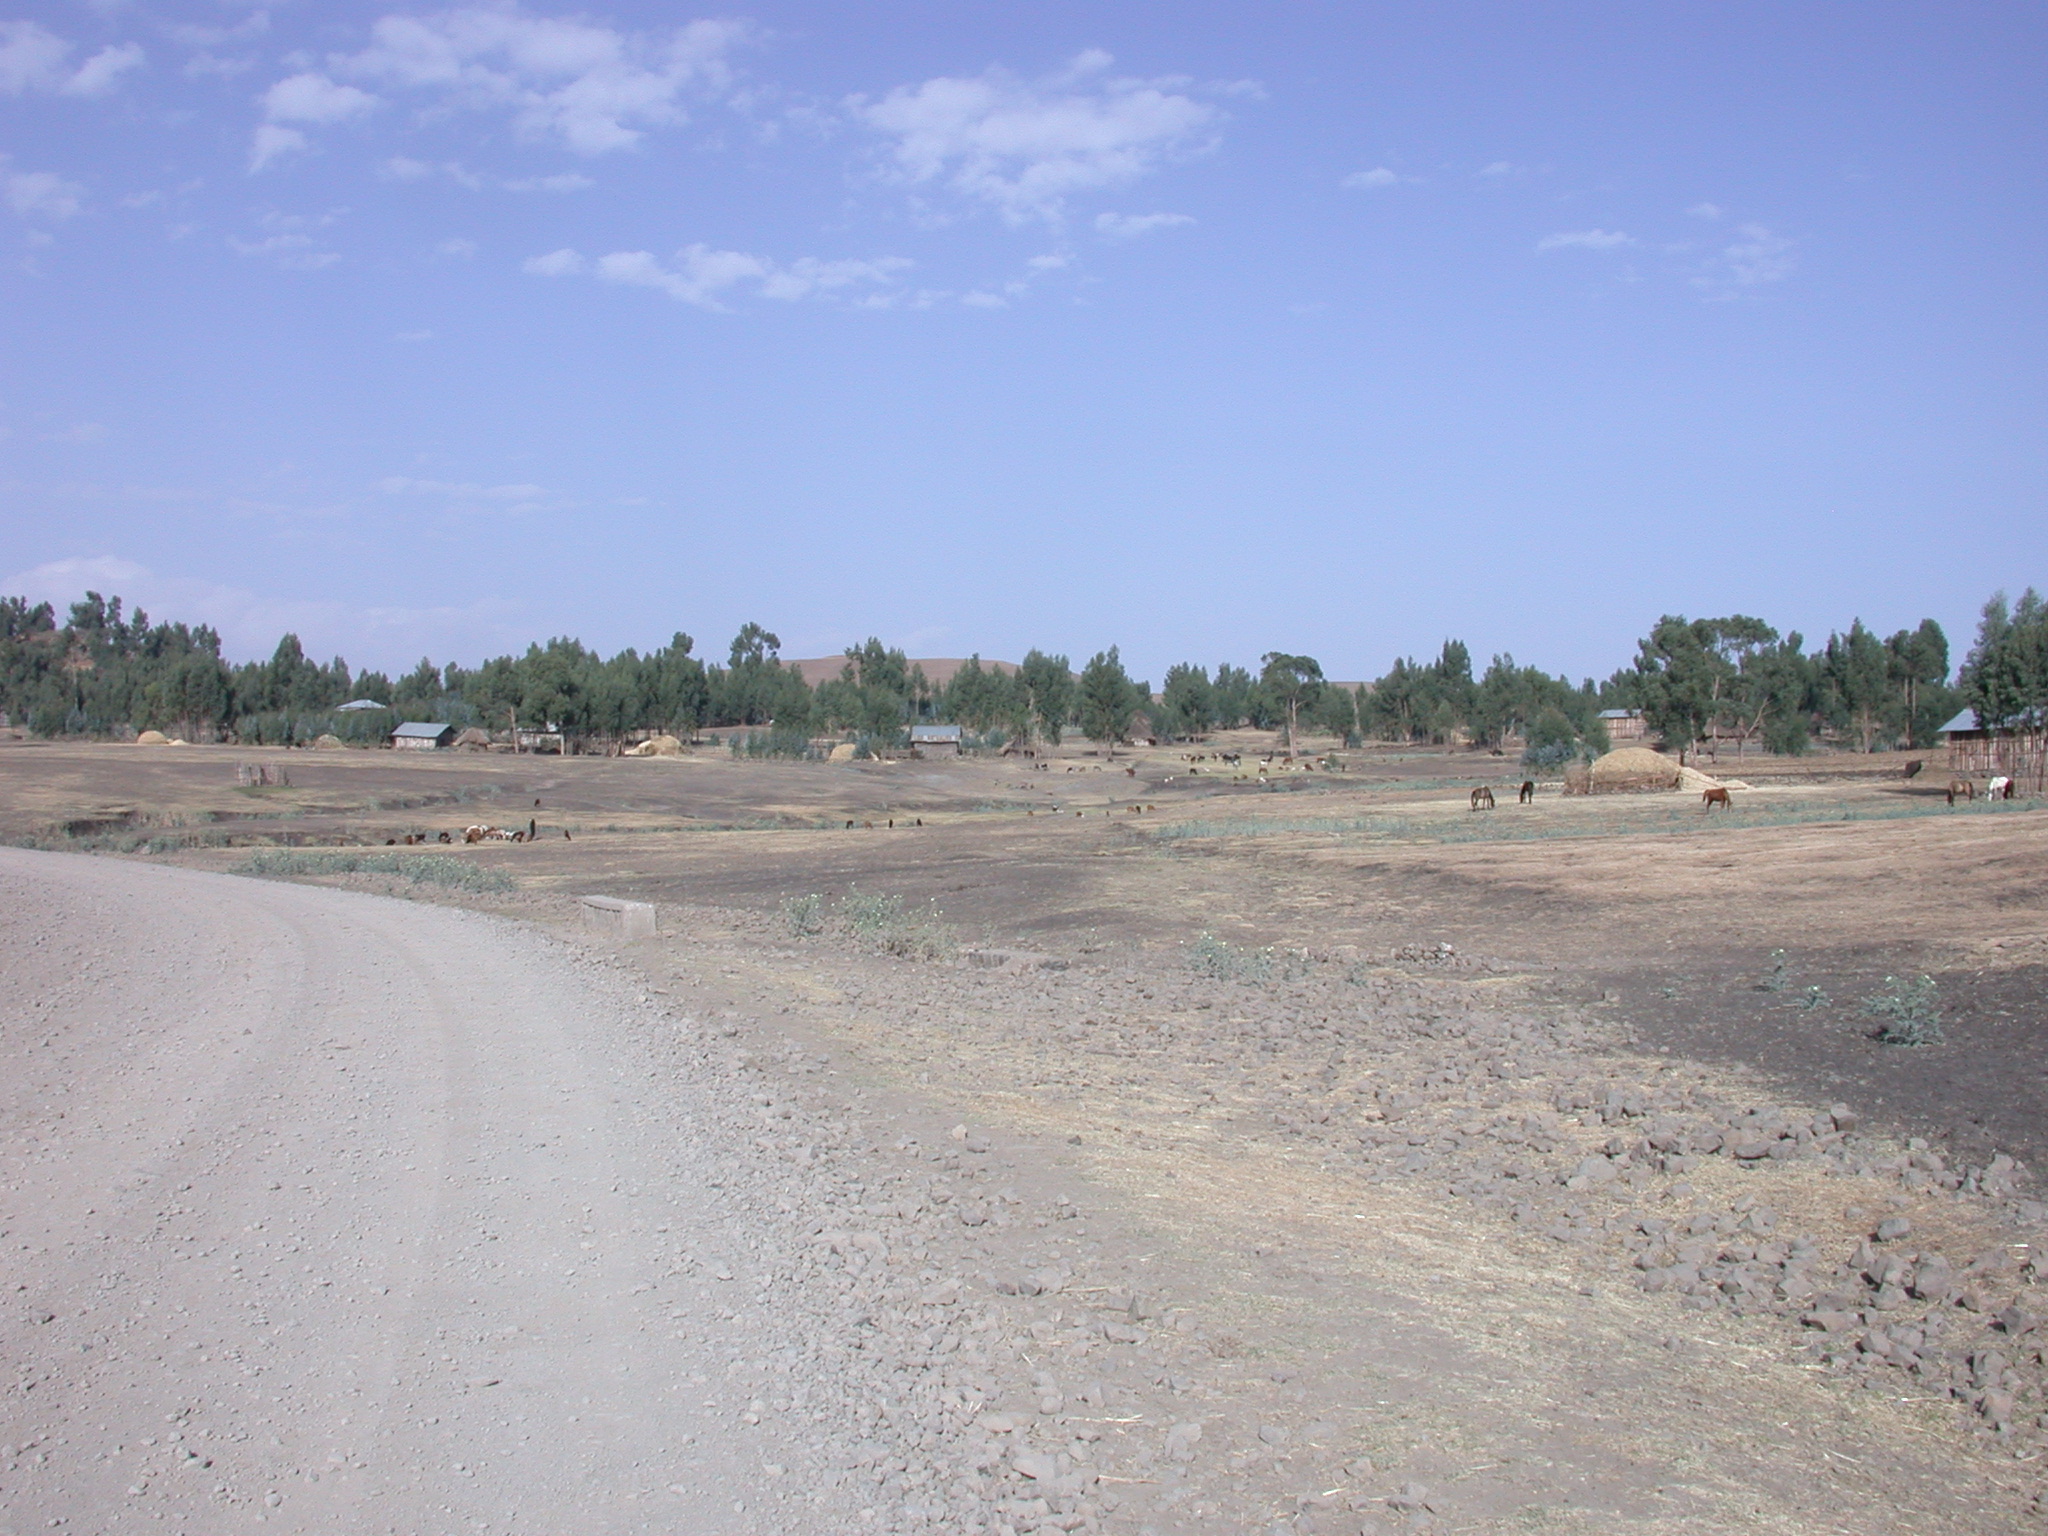 Village at Site of Bus Breakdown, Route From Gonder to Debark, Ethiopia